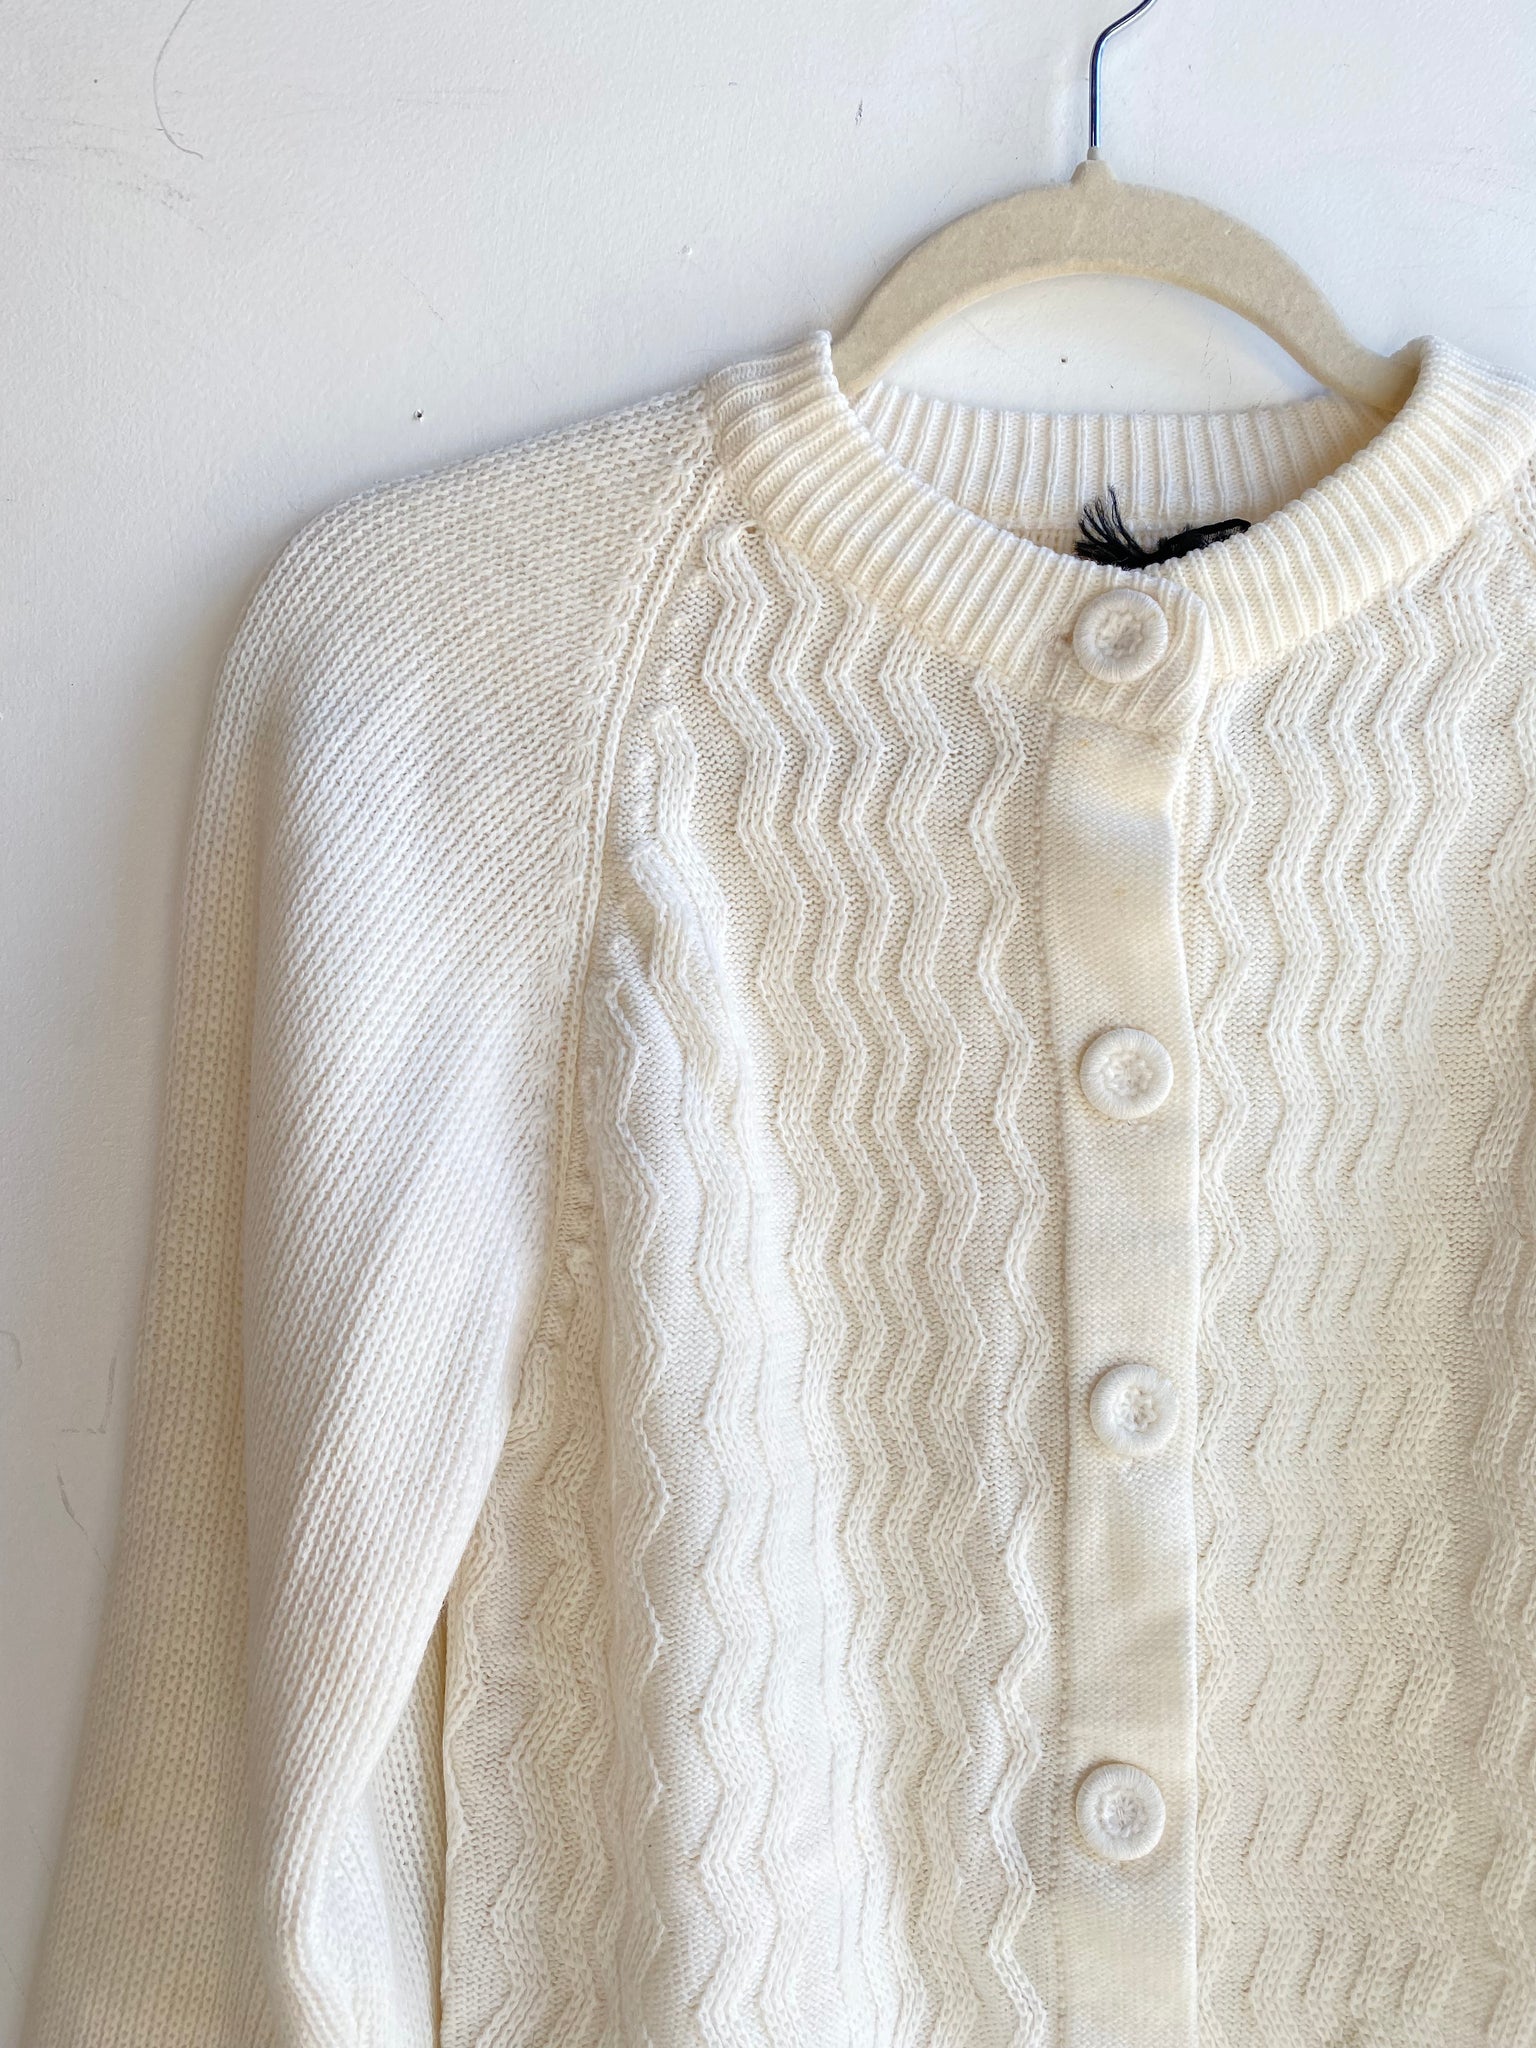 60s Ivory Knit Button Up Sweater